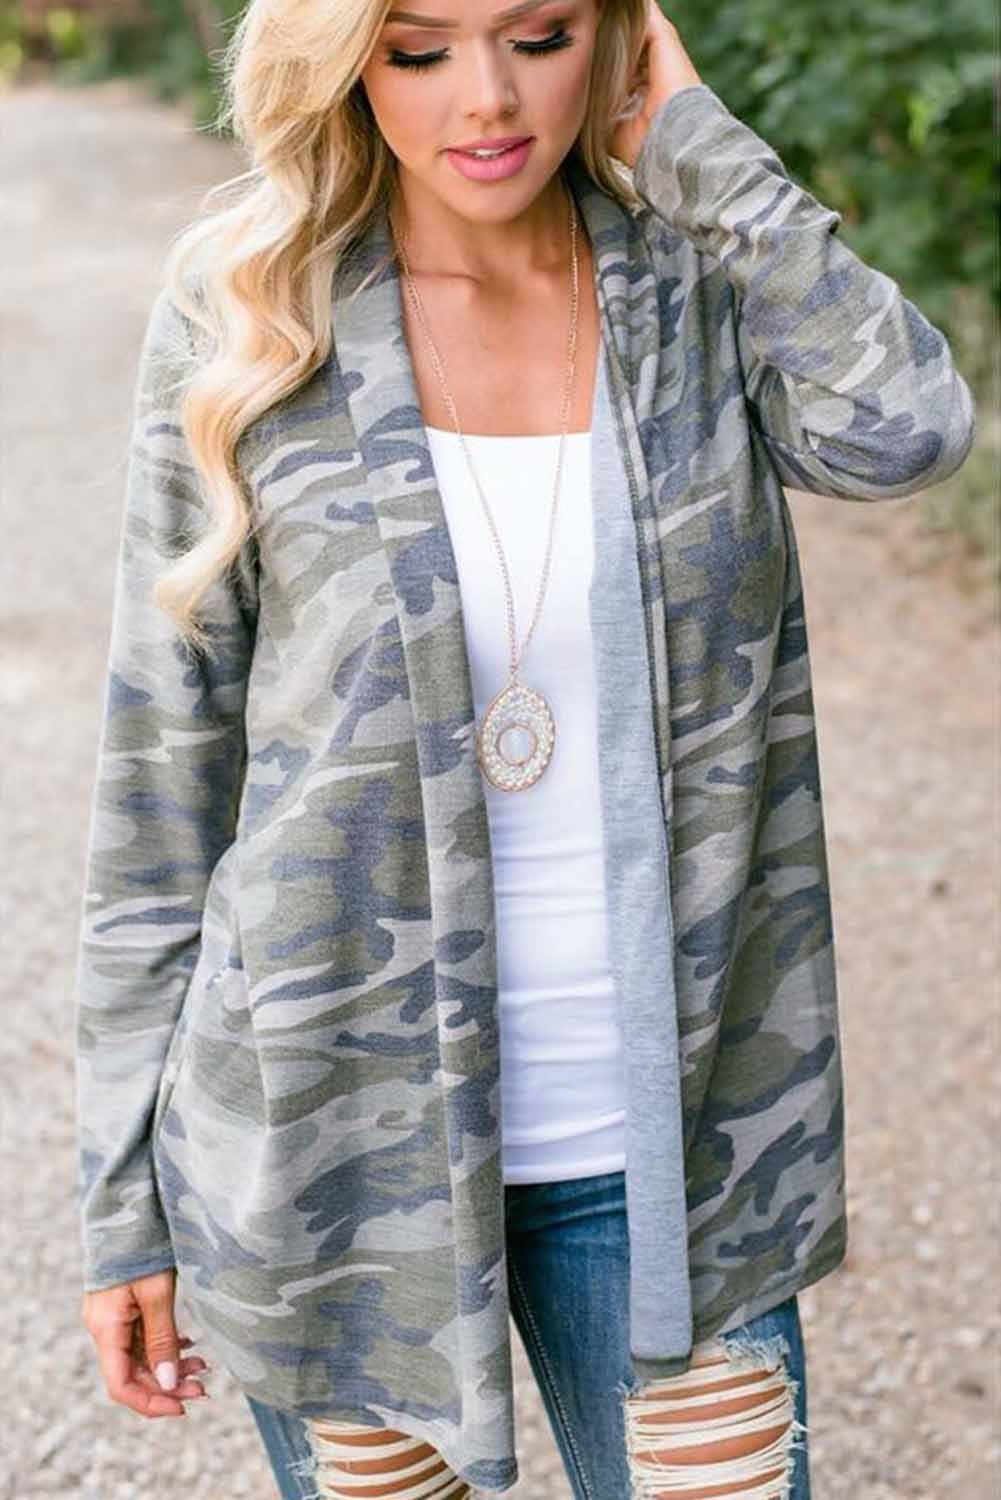 Wholesale Other Category, Cheap Olive Shawl Neckline Camo Cardigan Online